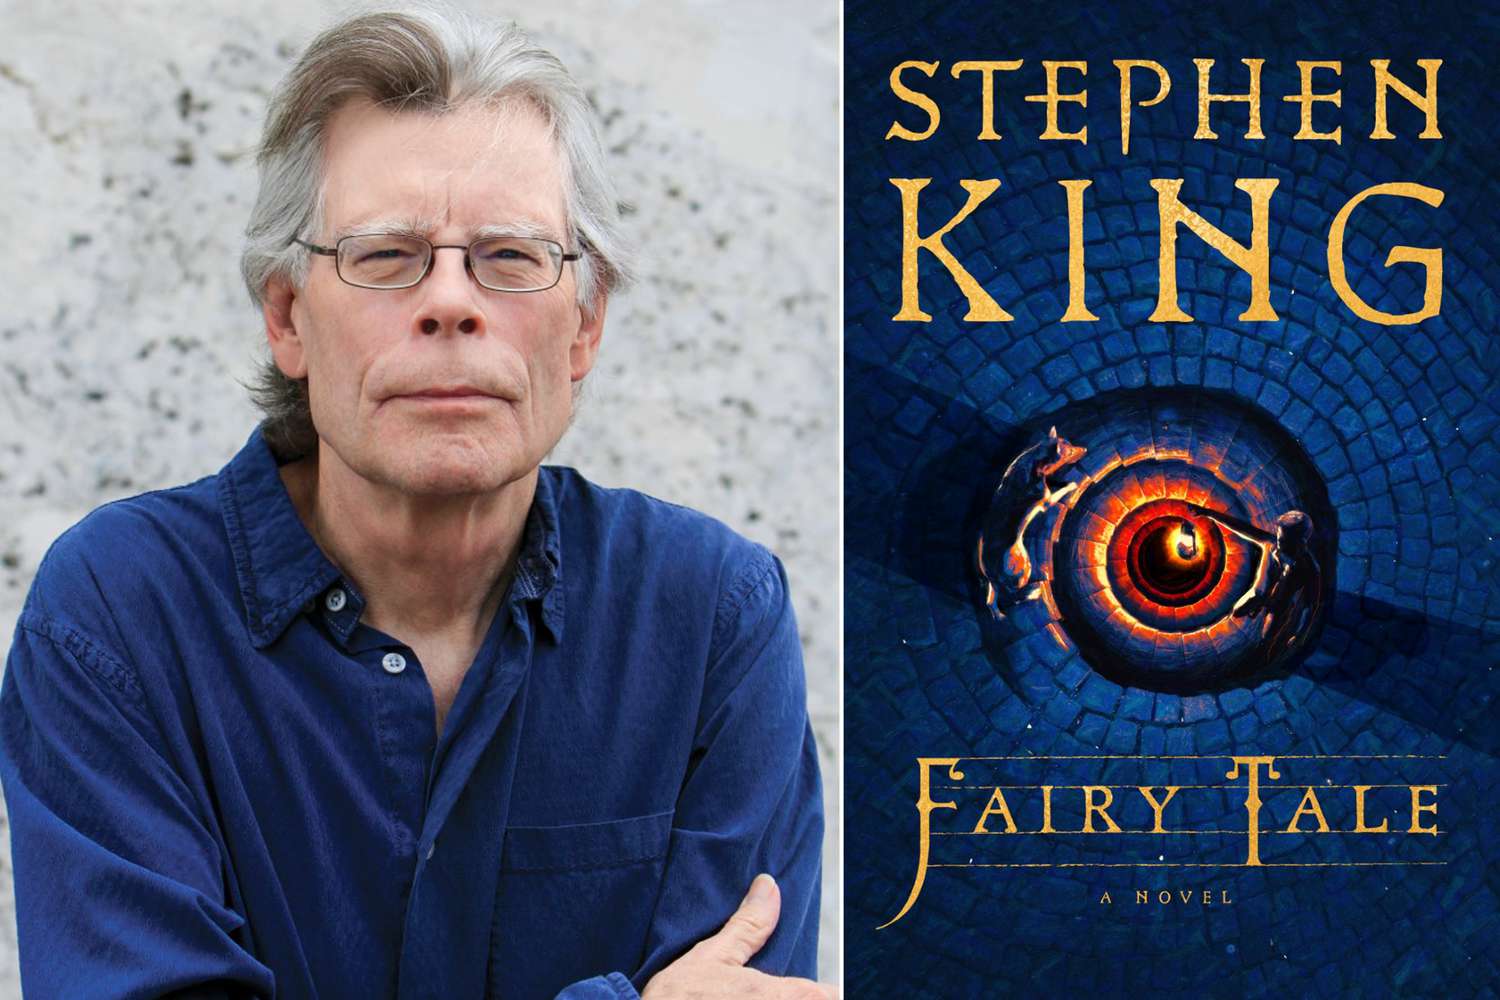 Read an exclusive excerpt from Stephen King's new novel 'Fairy Tale'